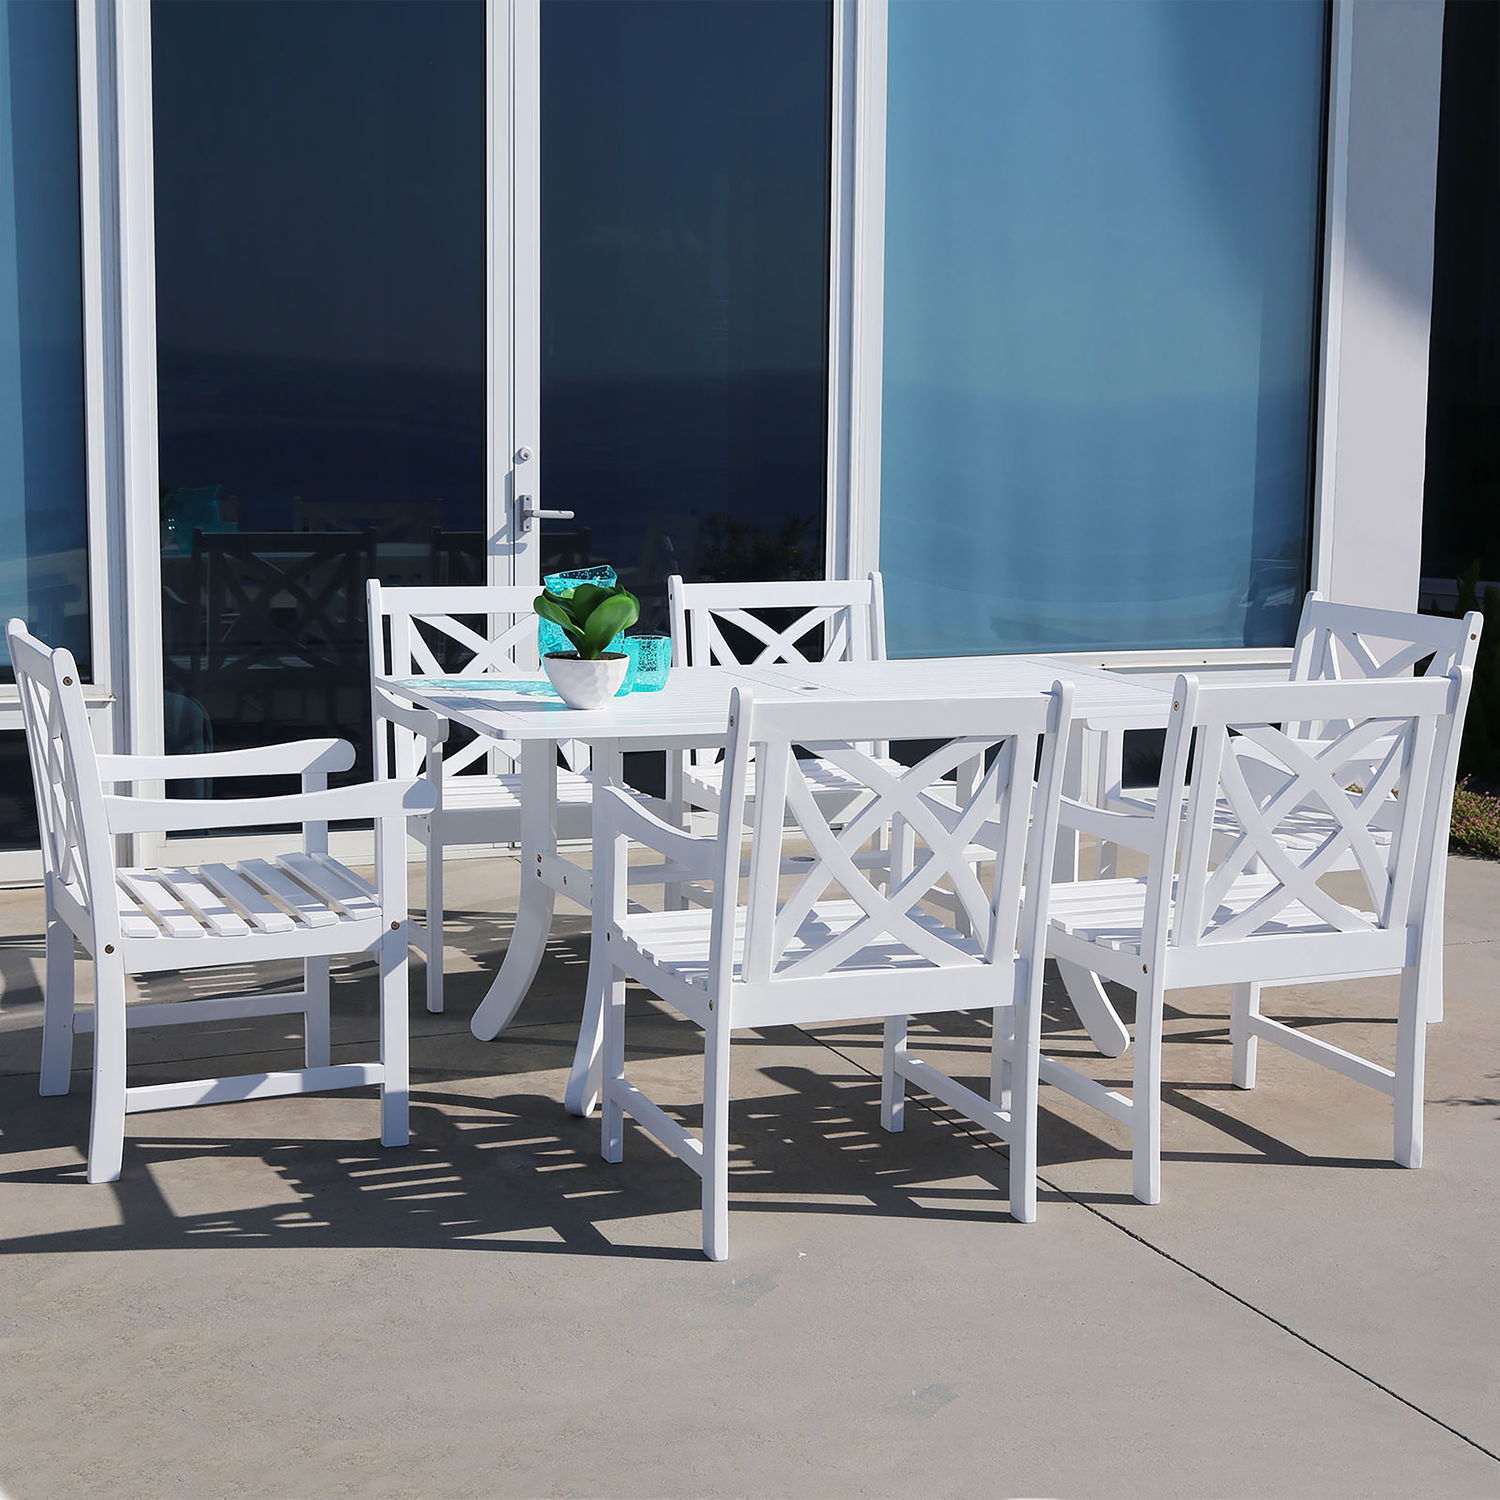 Bradley Outdoor 7-piece Wood Patio Dining Set in White